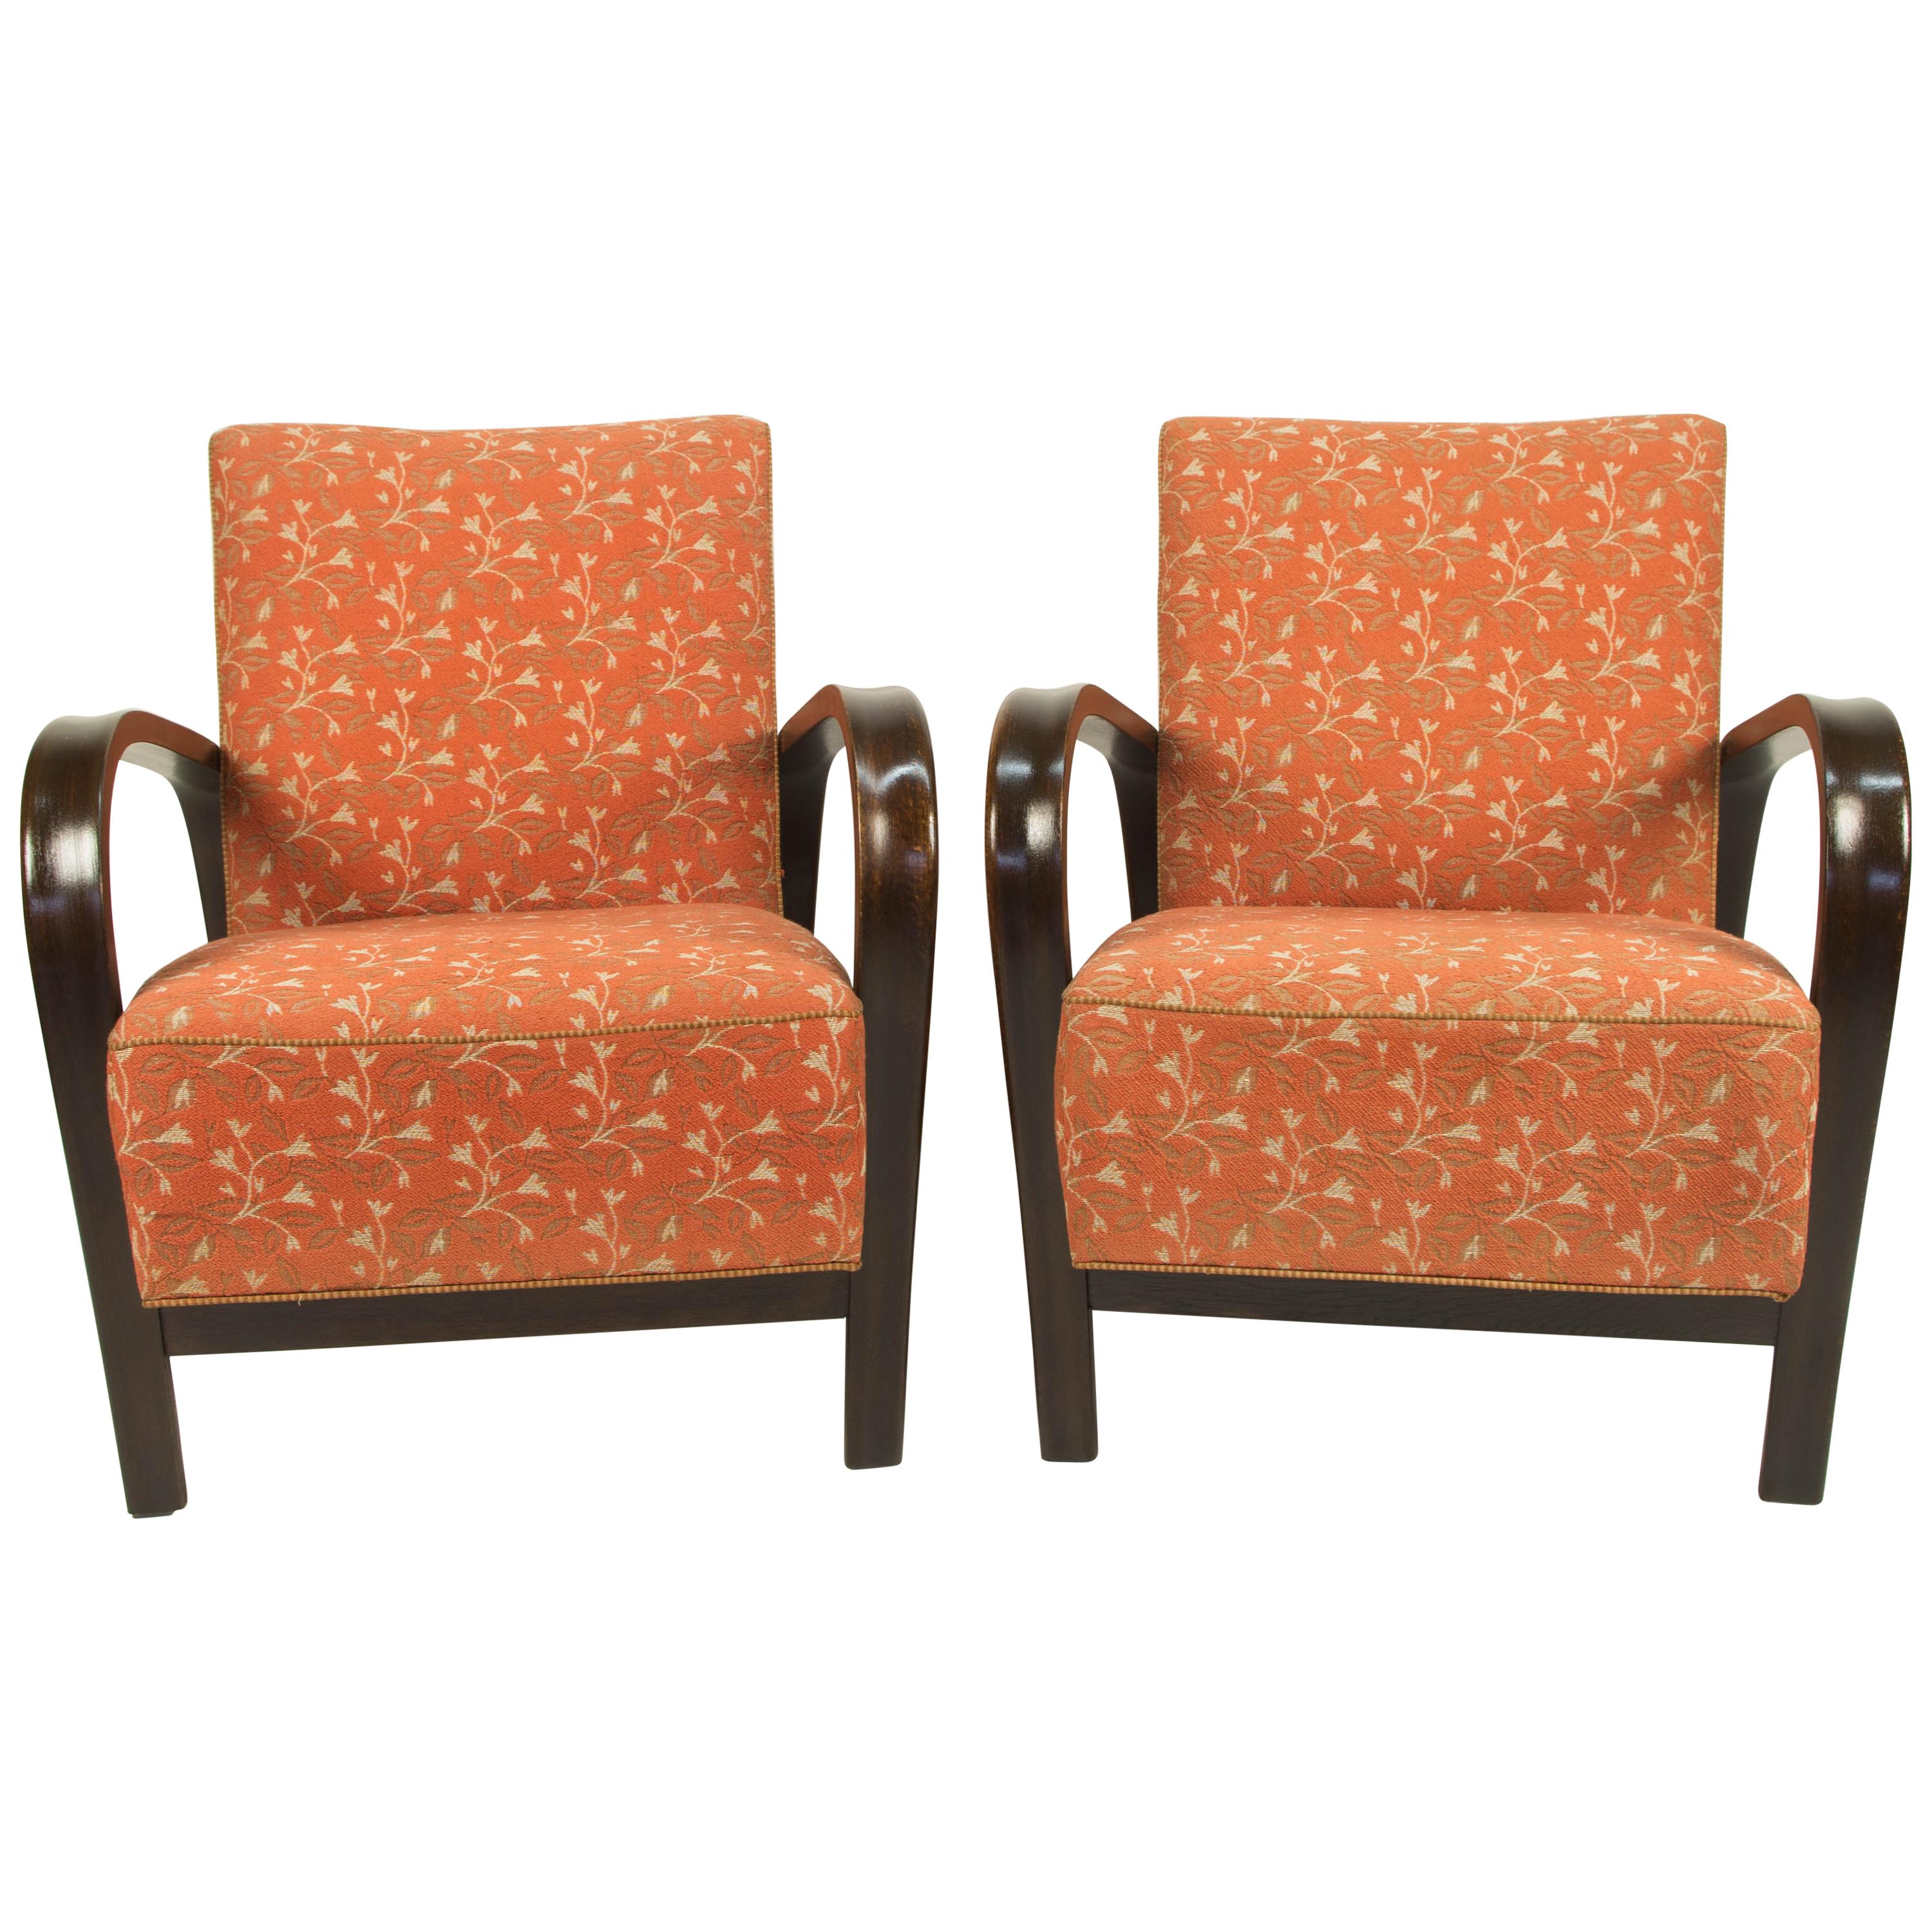 Hardly to find so extremely preserved set of two armchairs by famous Czech designers Karel Kozelka and Antonin Kropacek. Original upholstery with flowered pattern in excellent condition was professionally cleaned. Wooden parts with beautiful patina